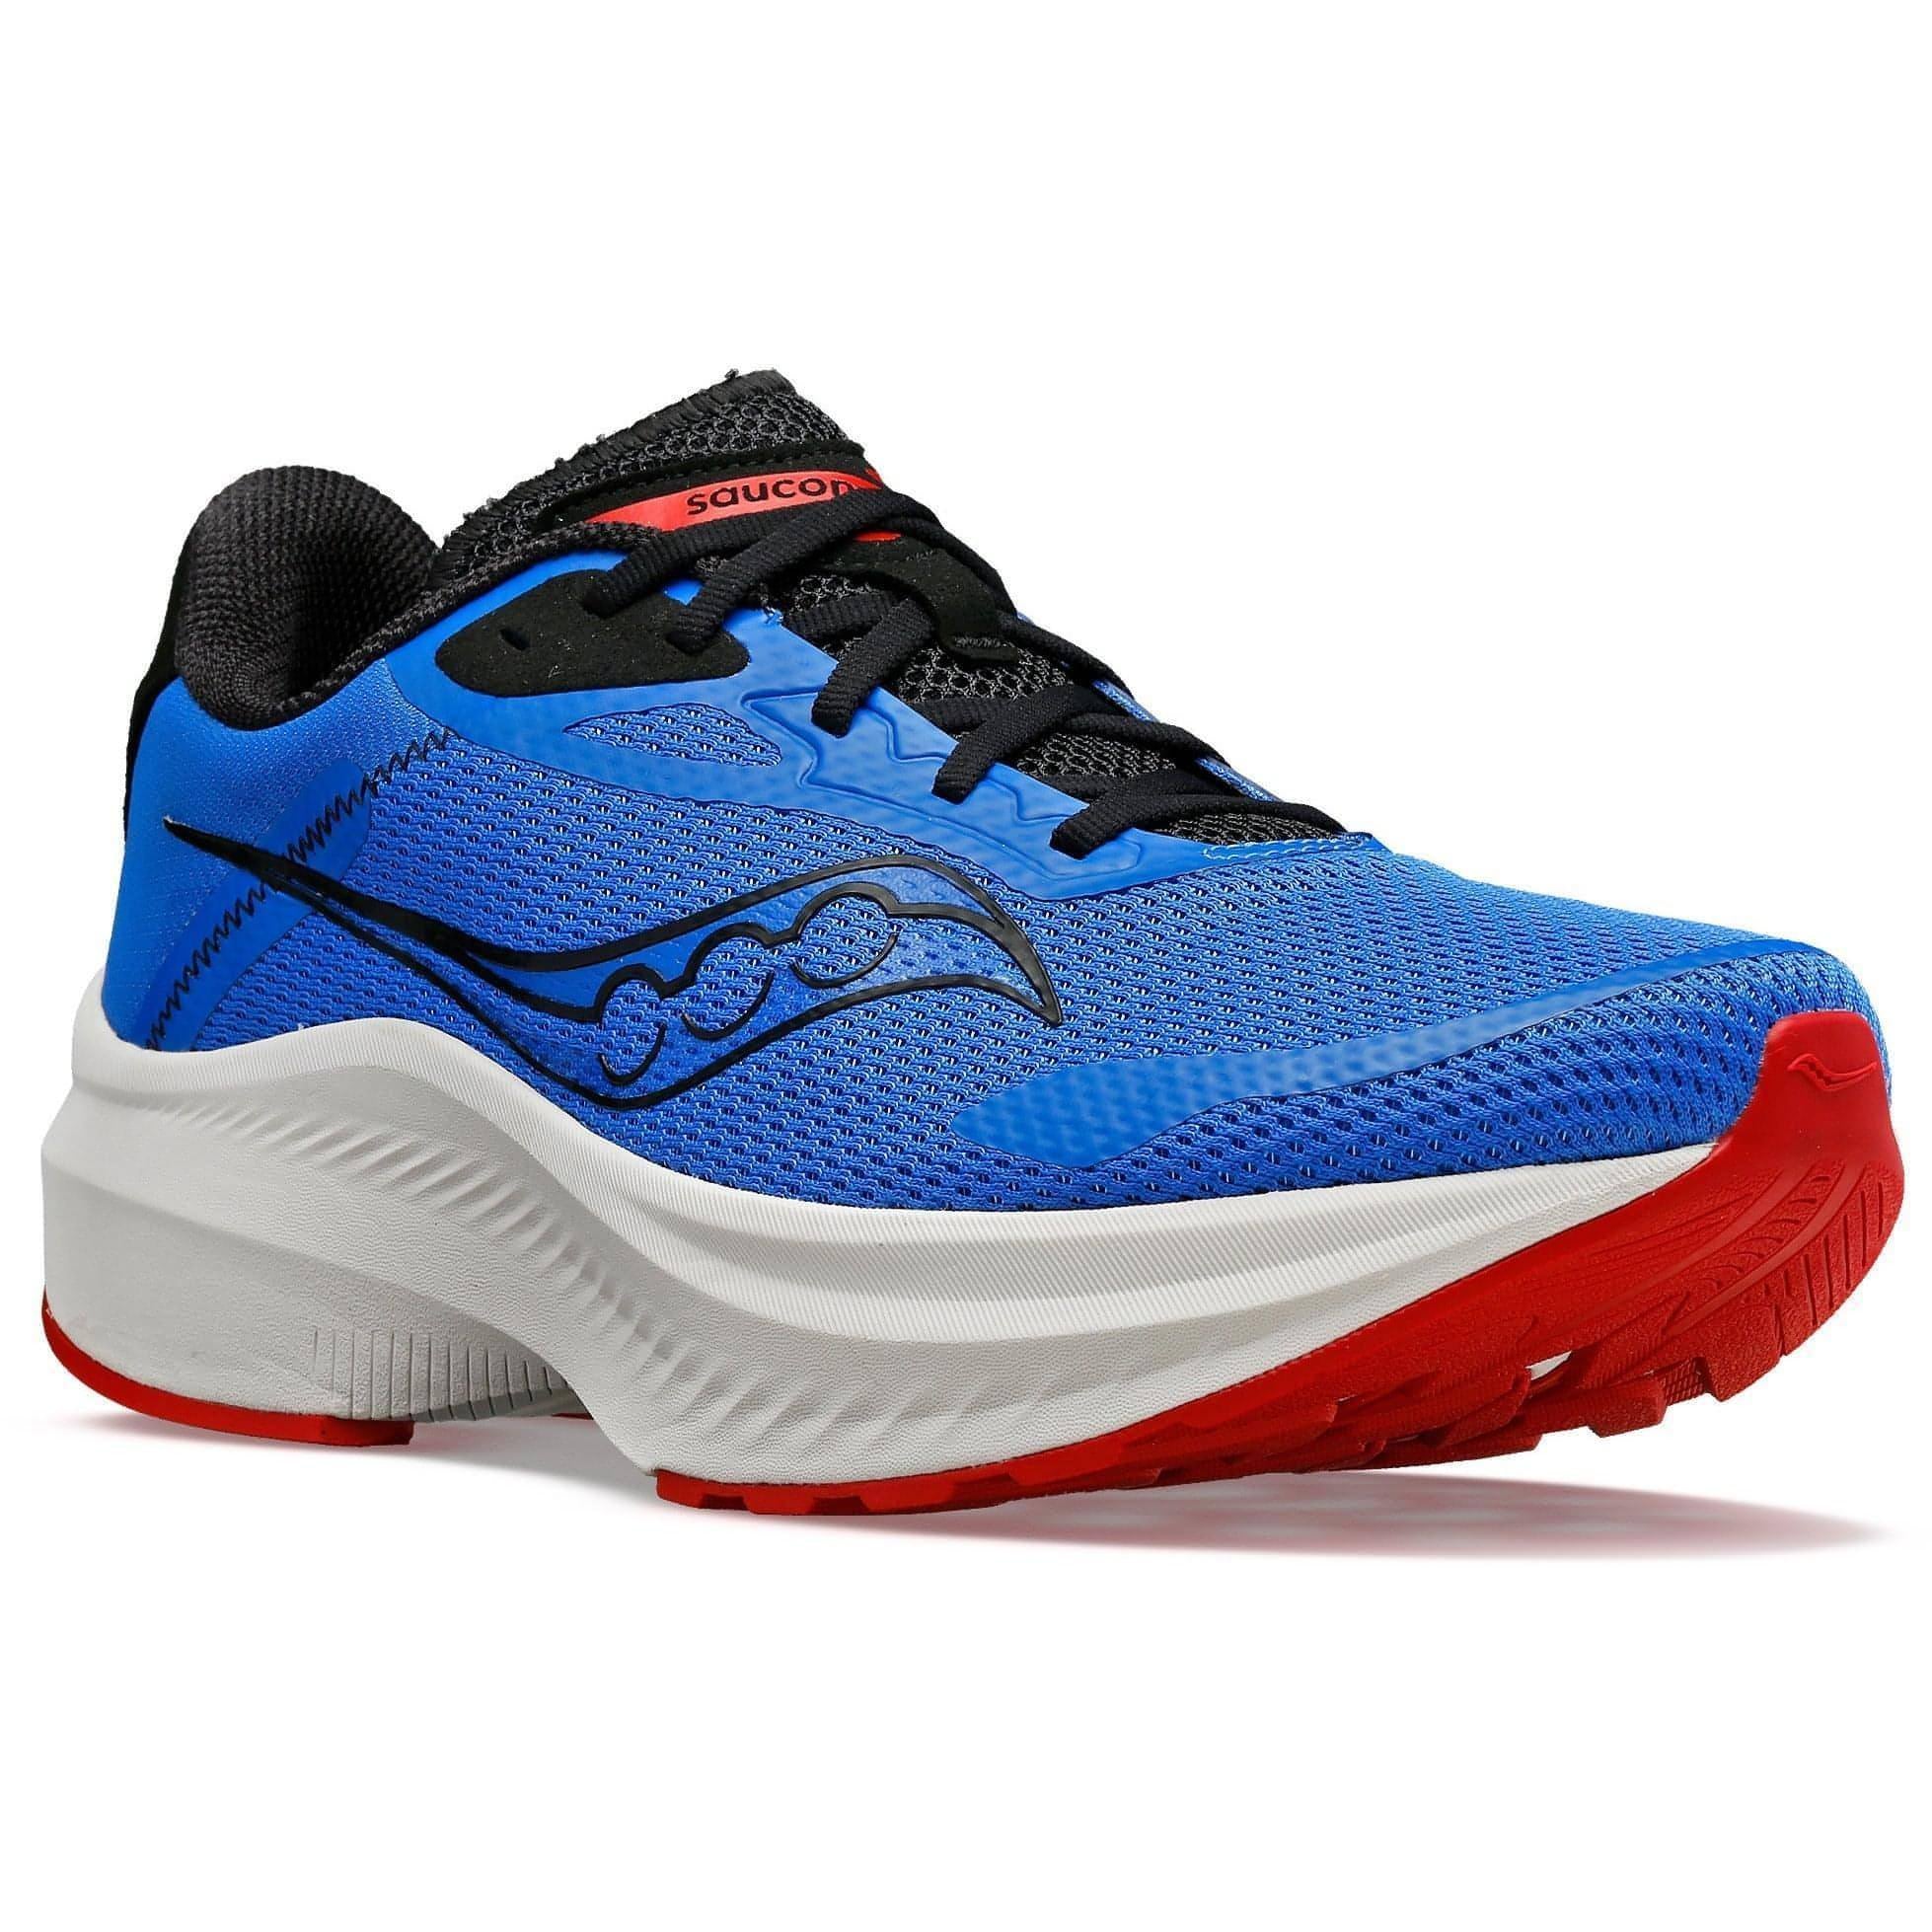 Saucony Axon 3 Mens Running Shoes - Blue